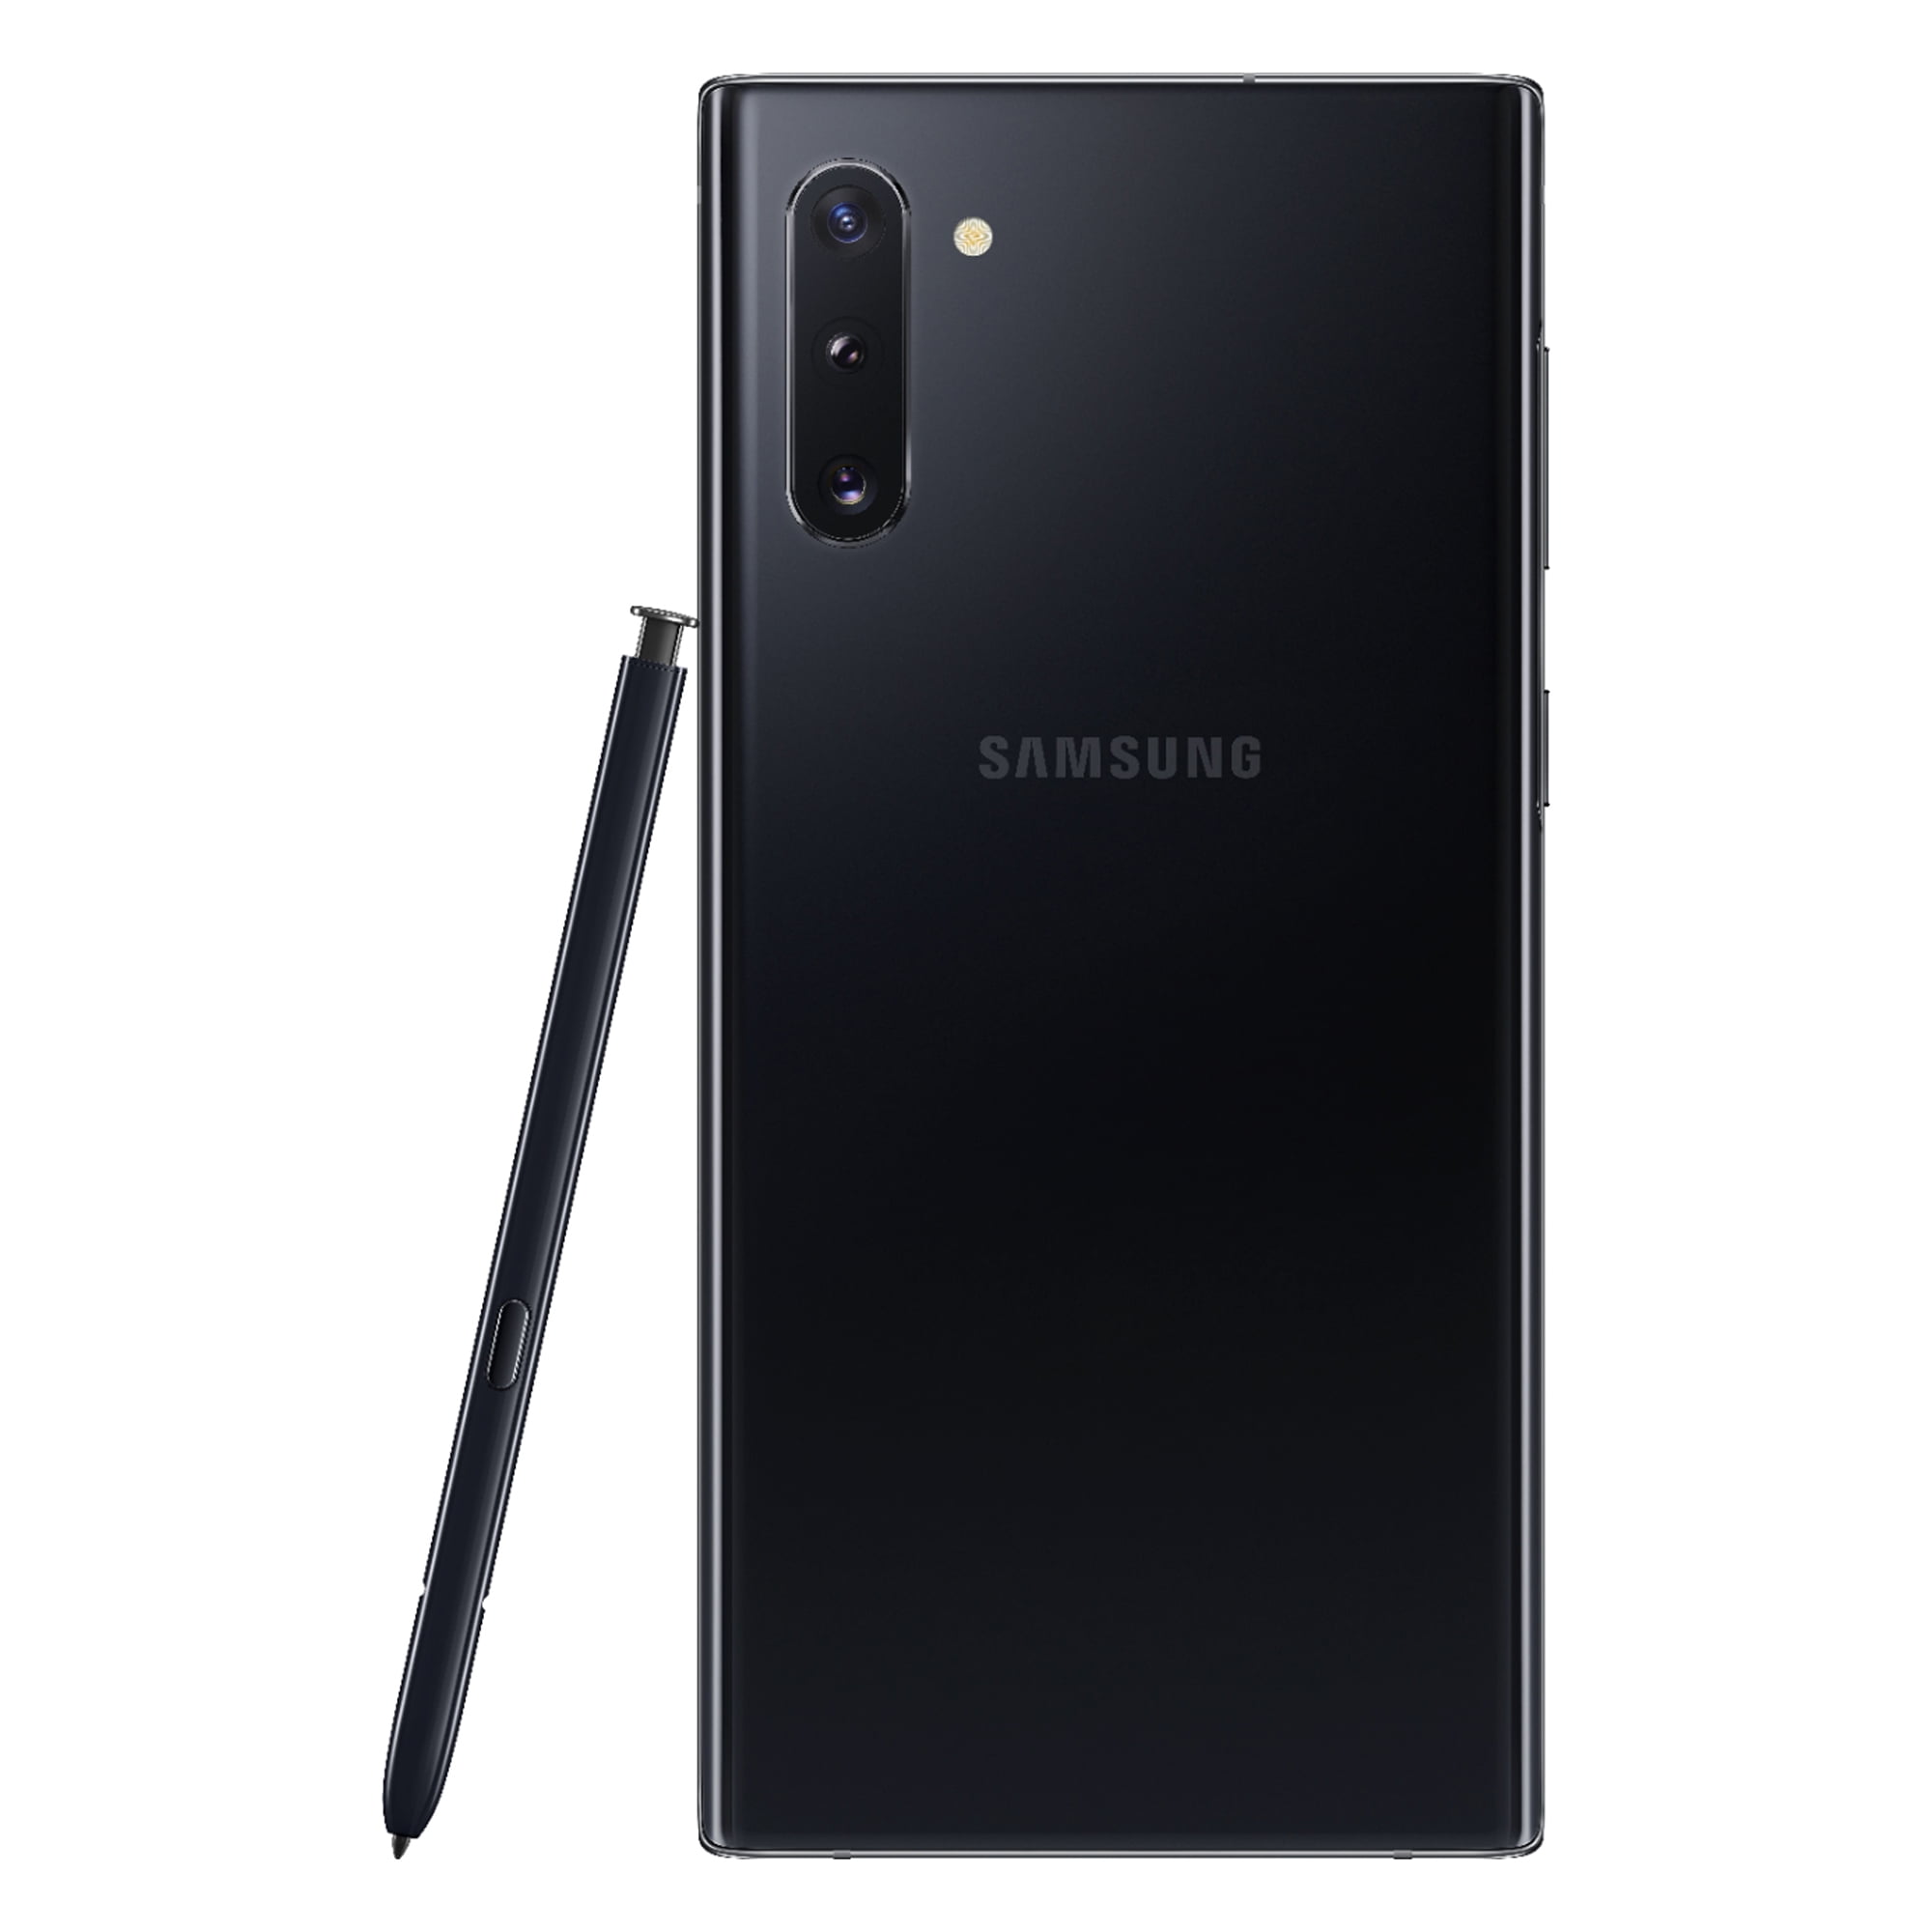  Samsung Galaxy Note 10+, 256GB, Aura Black - For GSM (Renewed)  : Cell Phones & Accessories